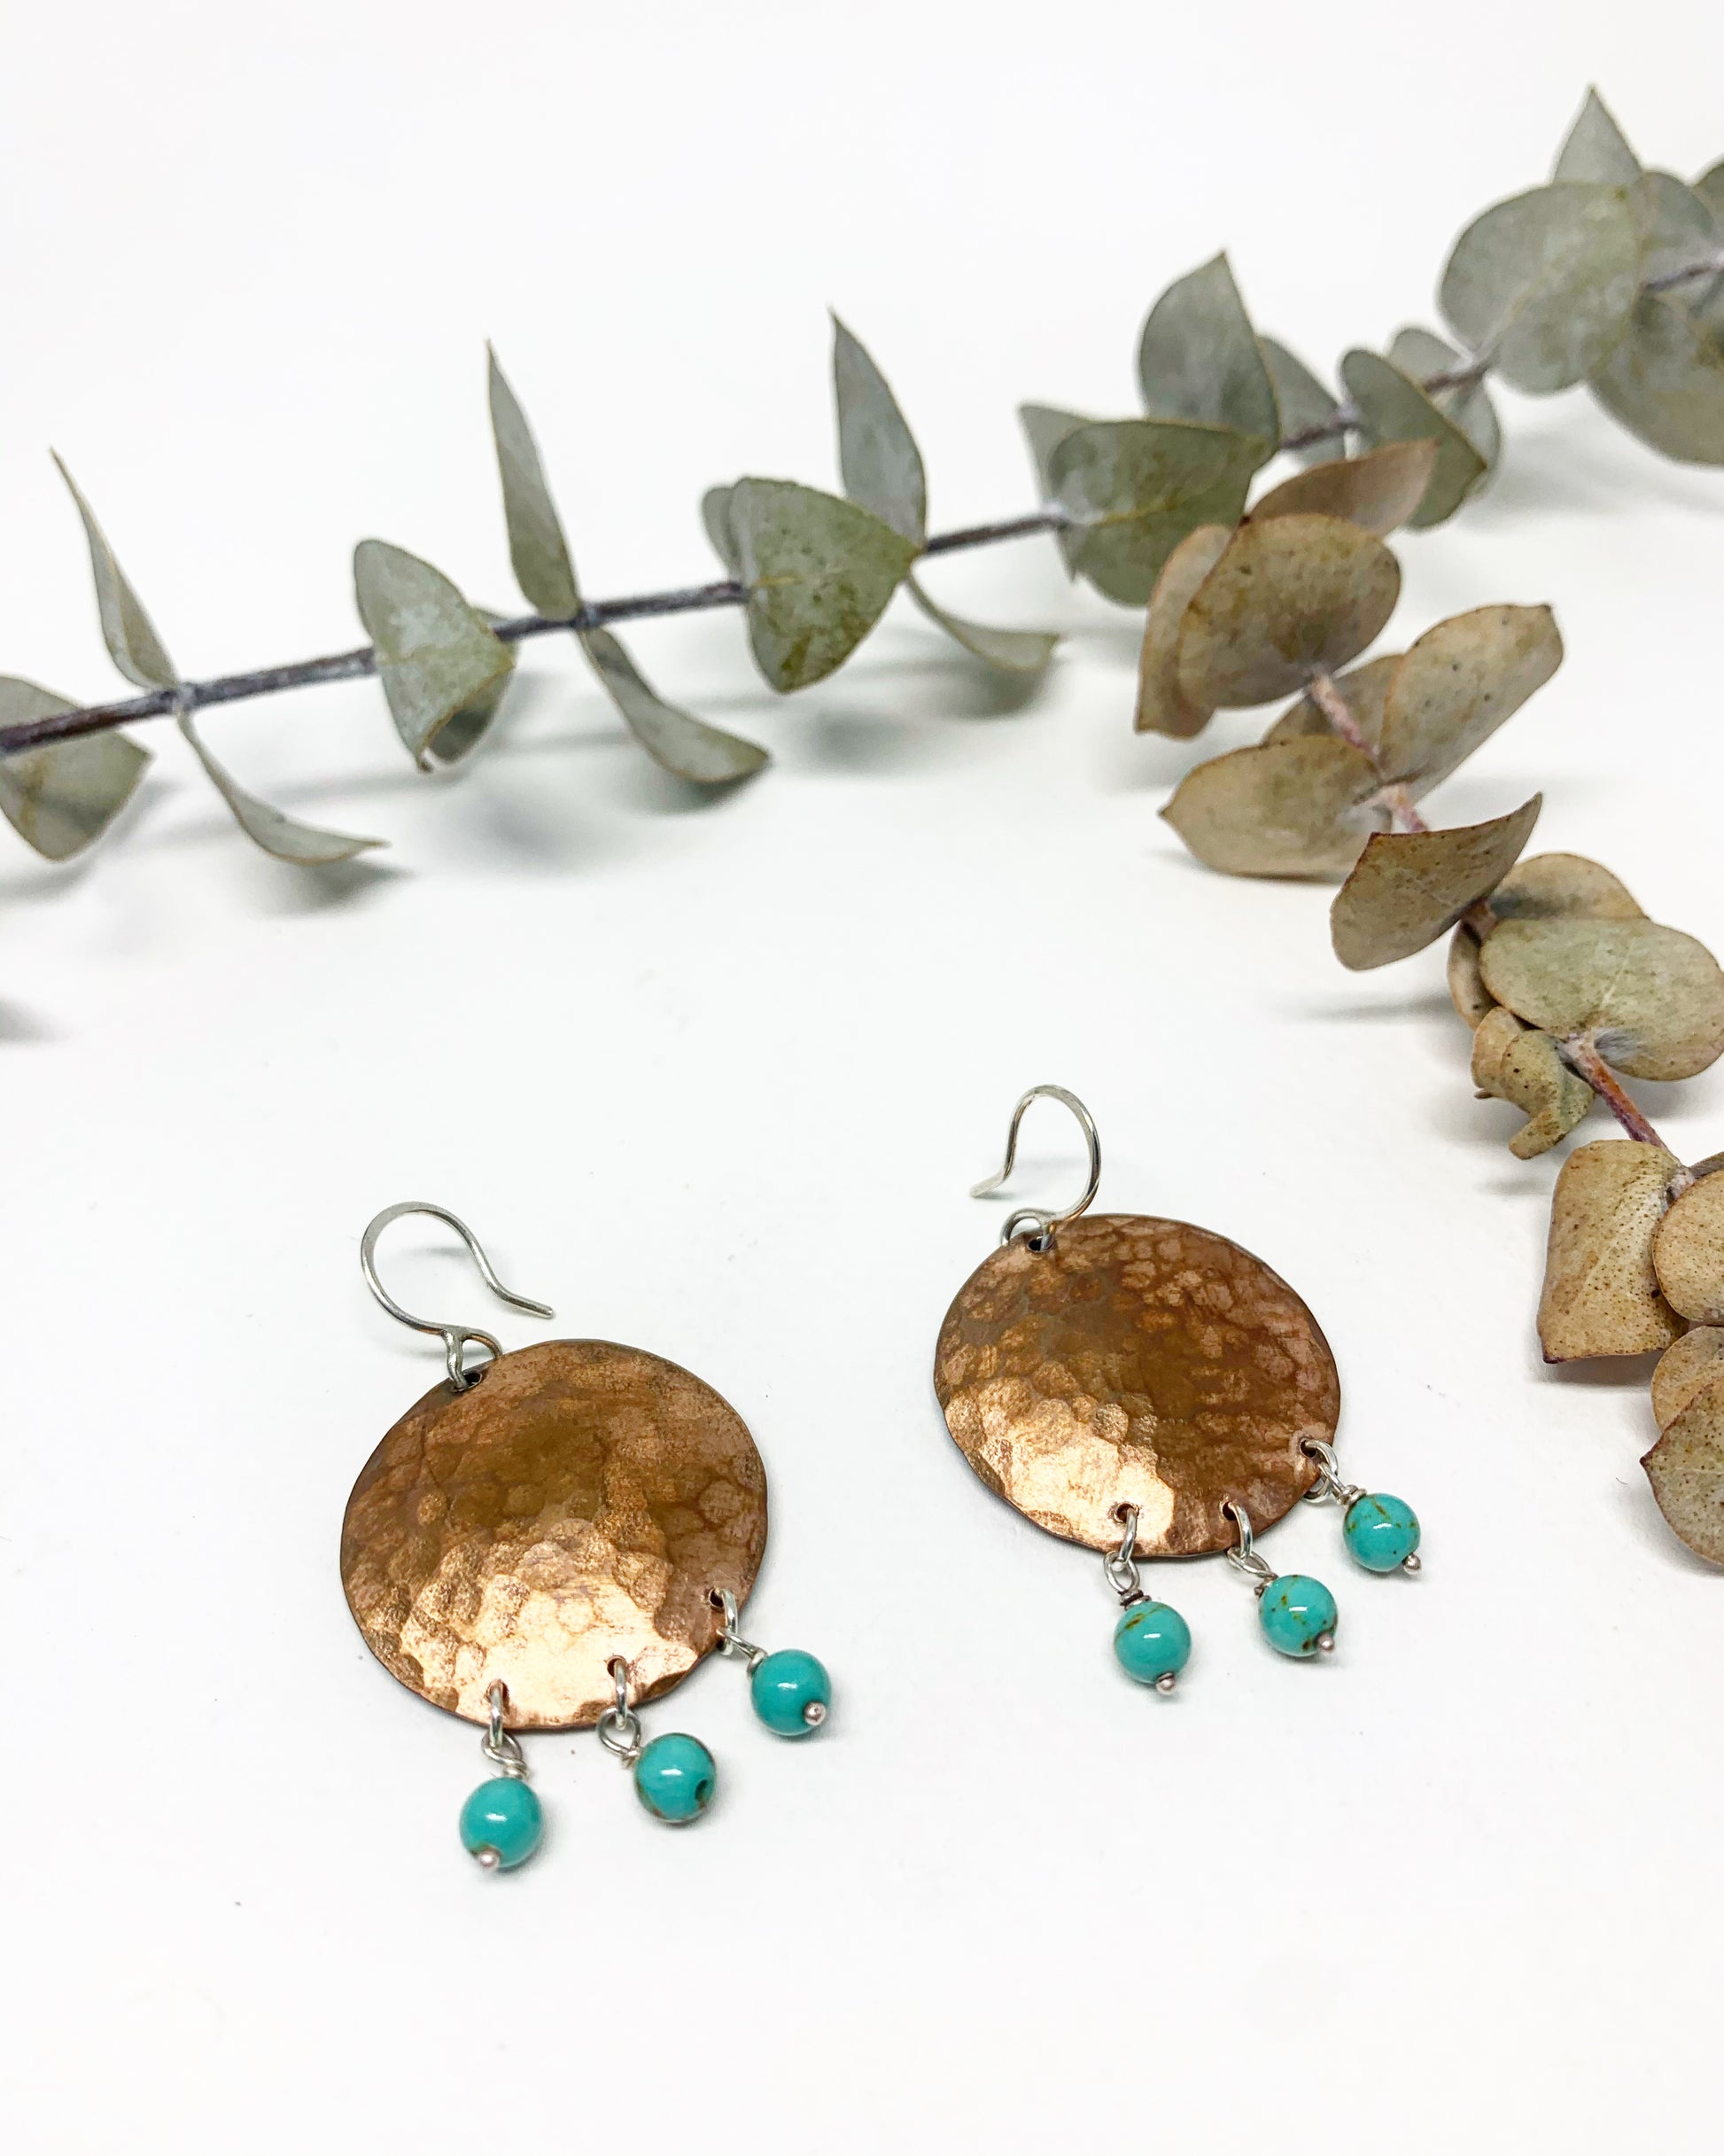 Full Moon Earrings with Turquoise Drops - Jennifer Cervelli Jewelry